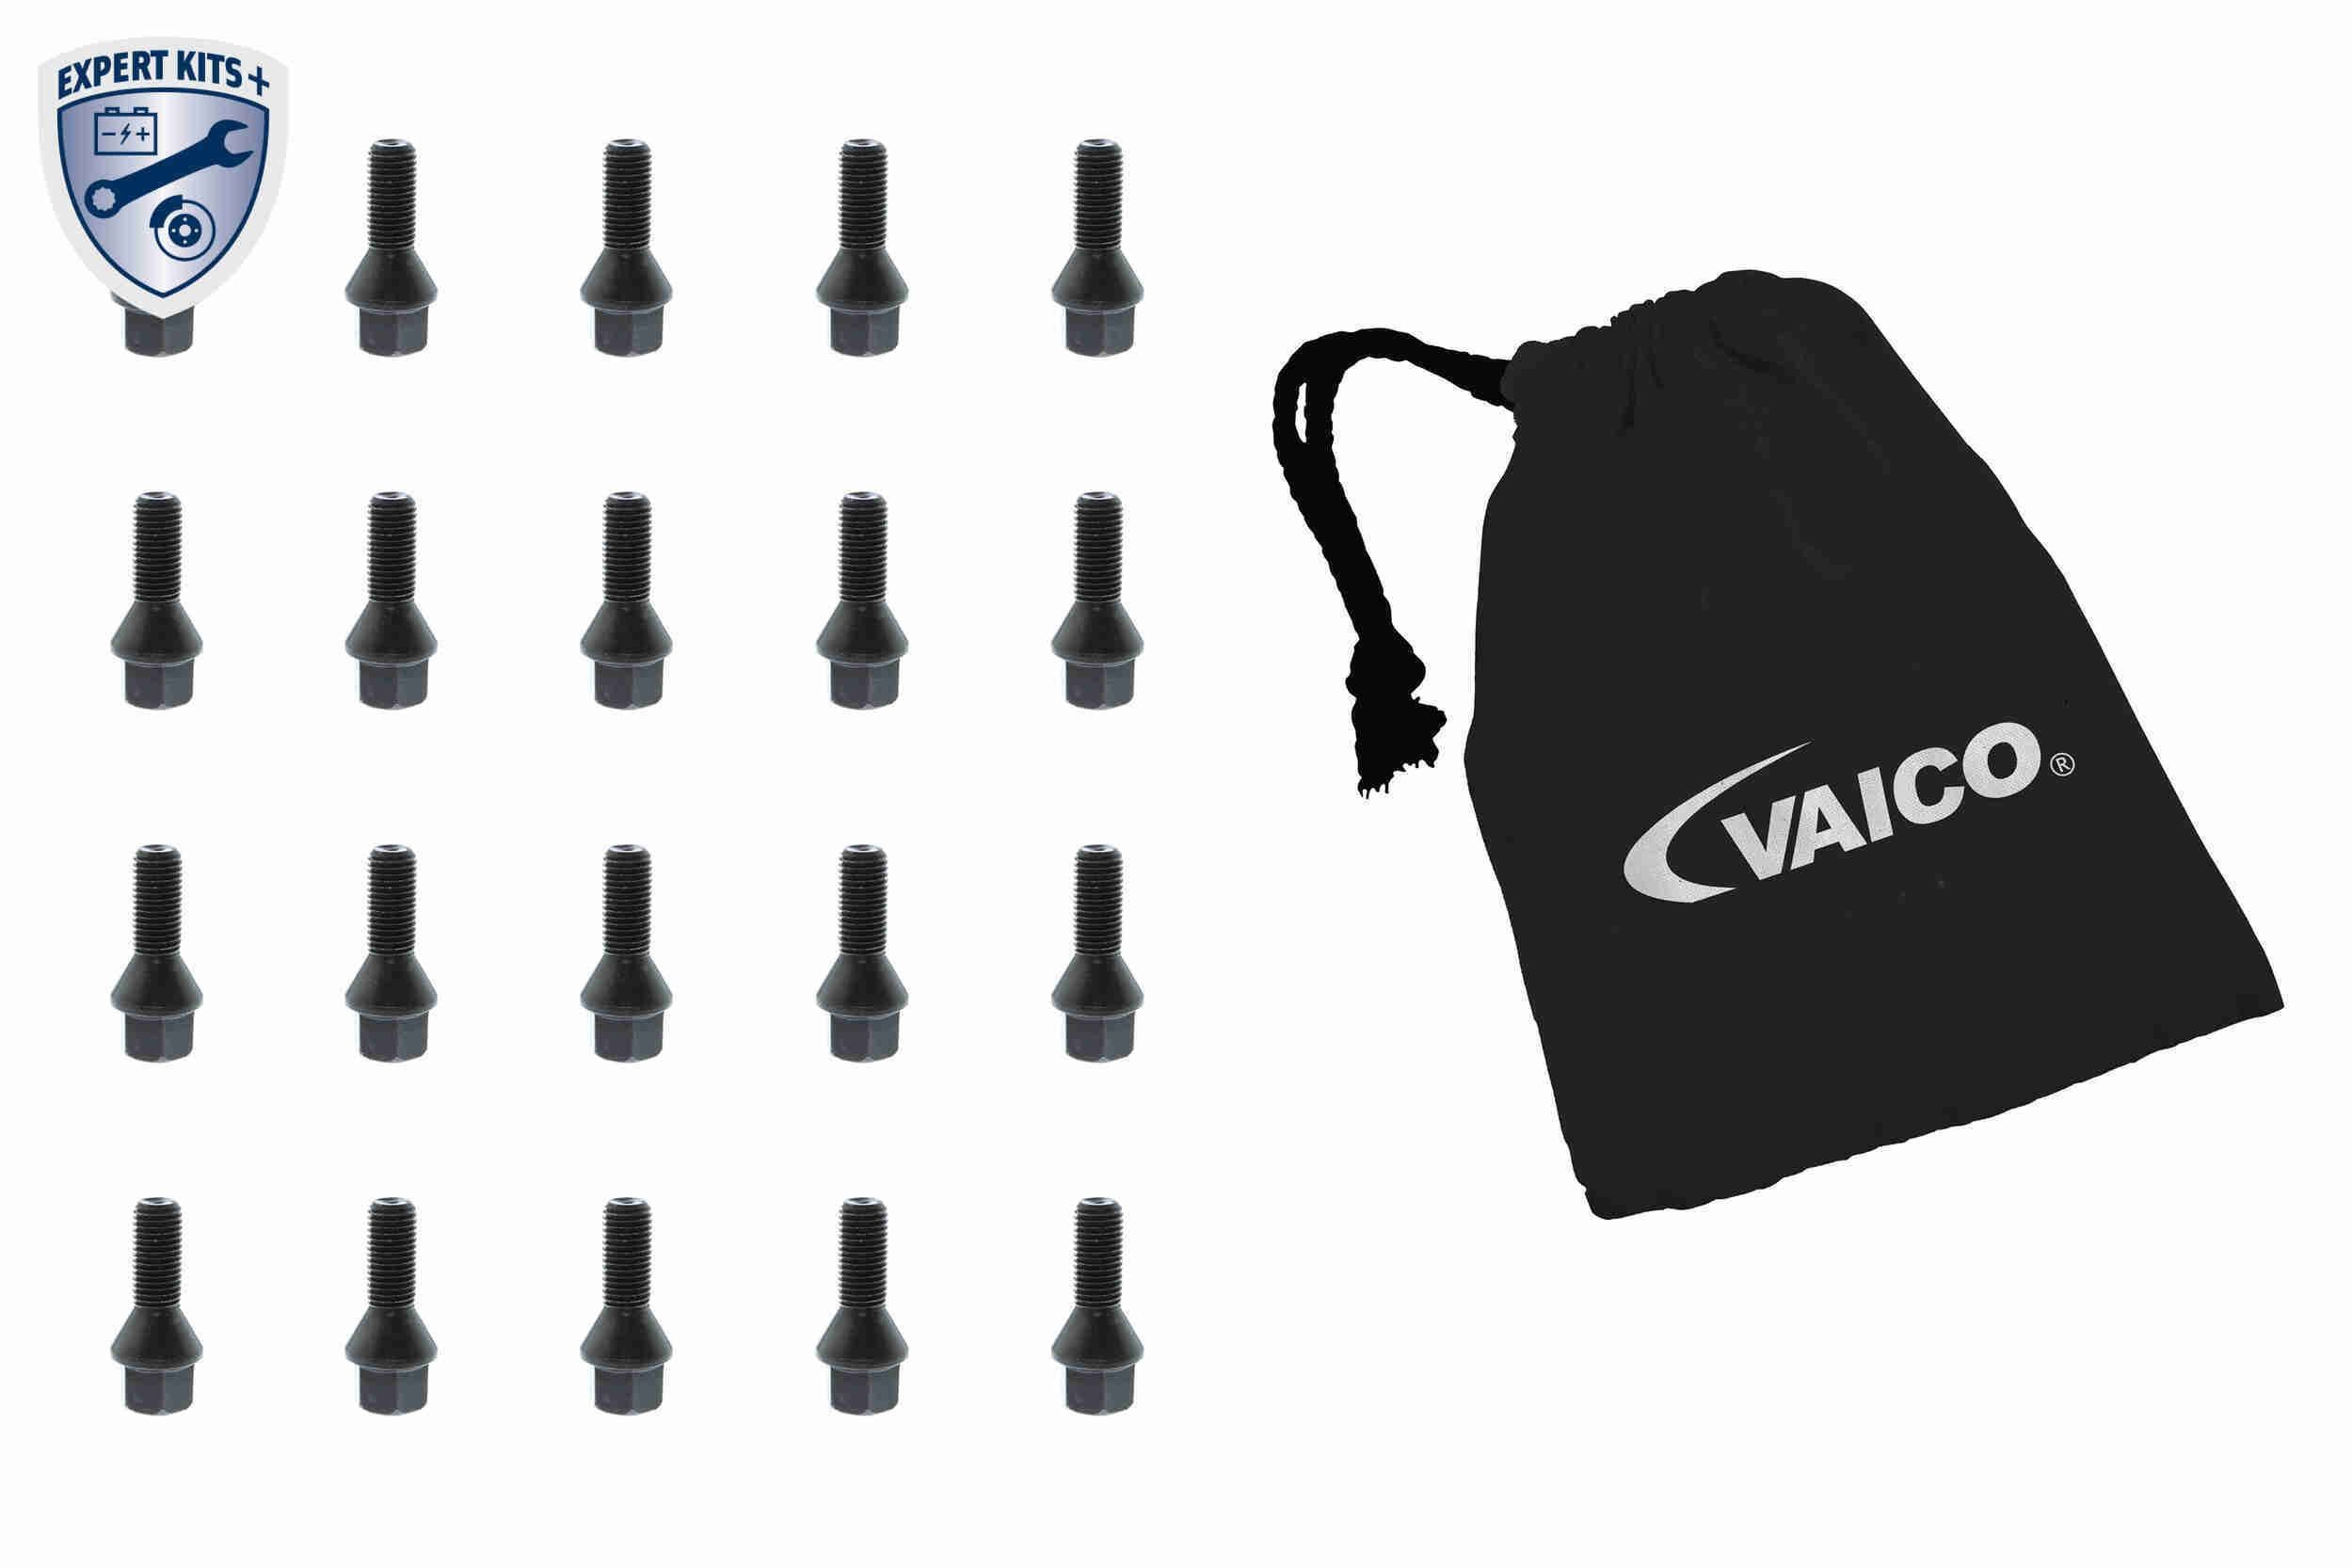 V20-2002-20 VAICO Wheel stud RENAULT M12 x 1,5 mm, Conical Seat F, 26 mm, 8,8, SW17, Male Hex